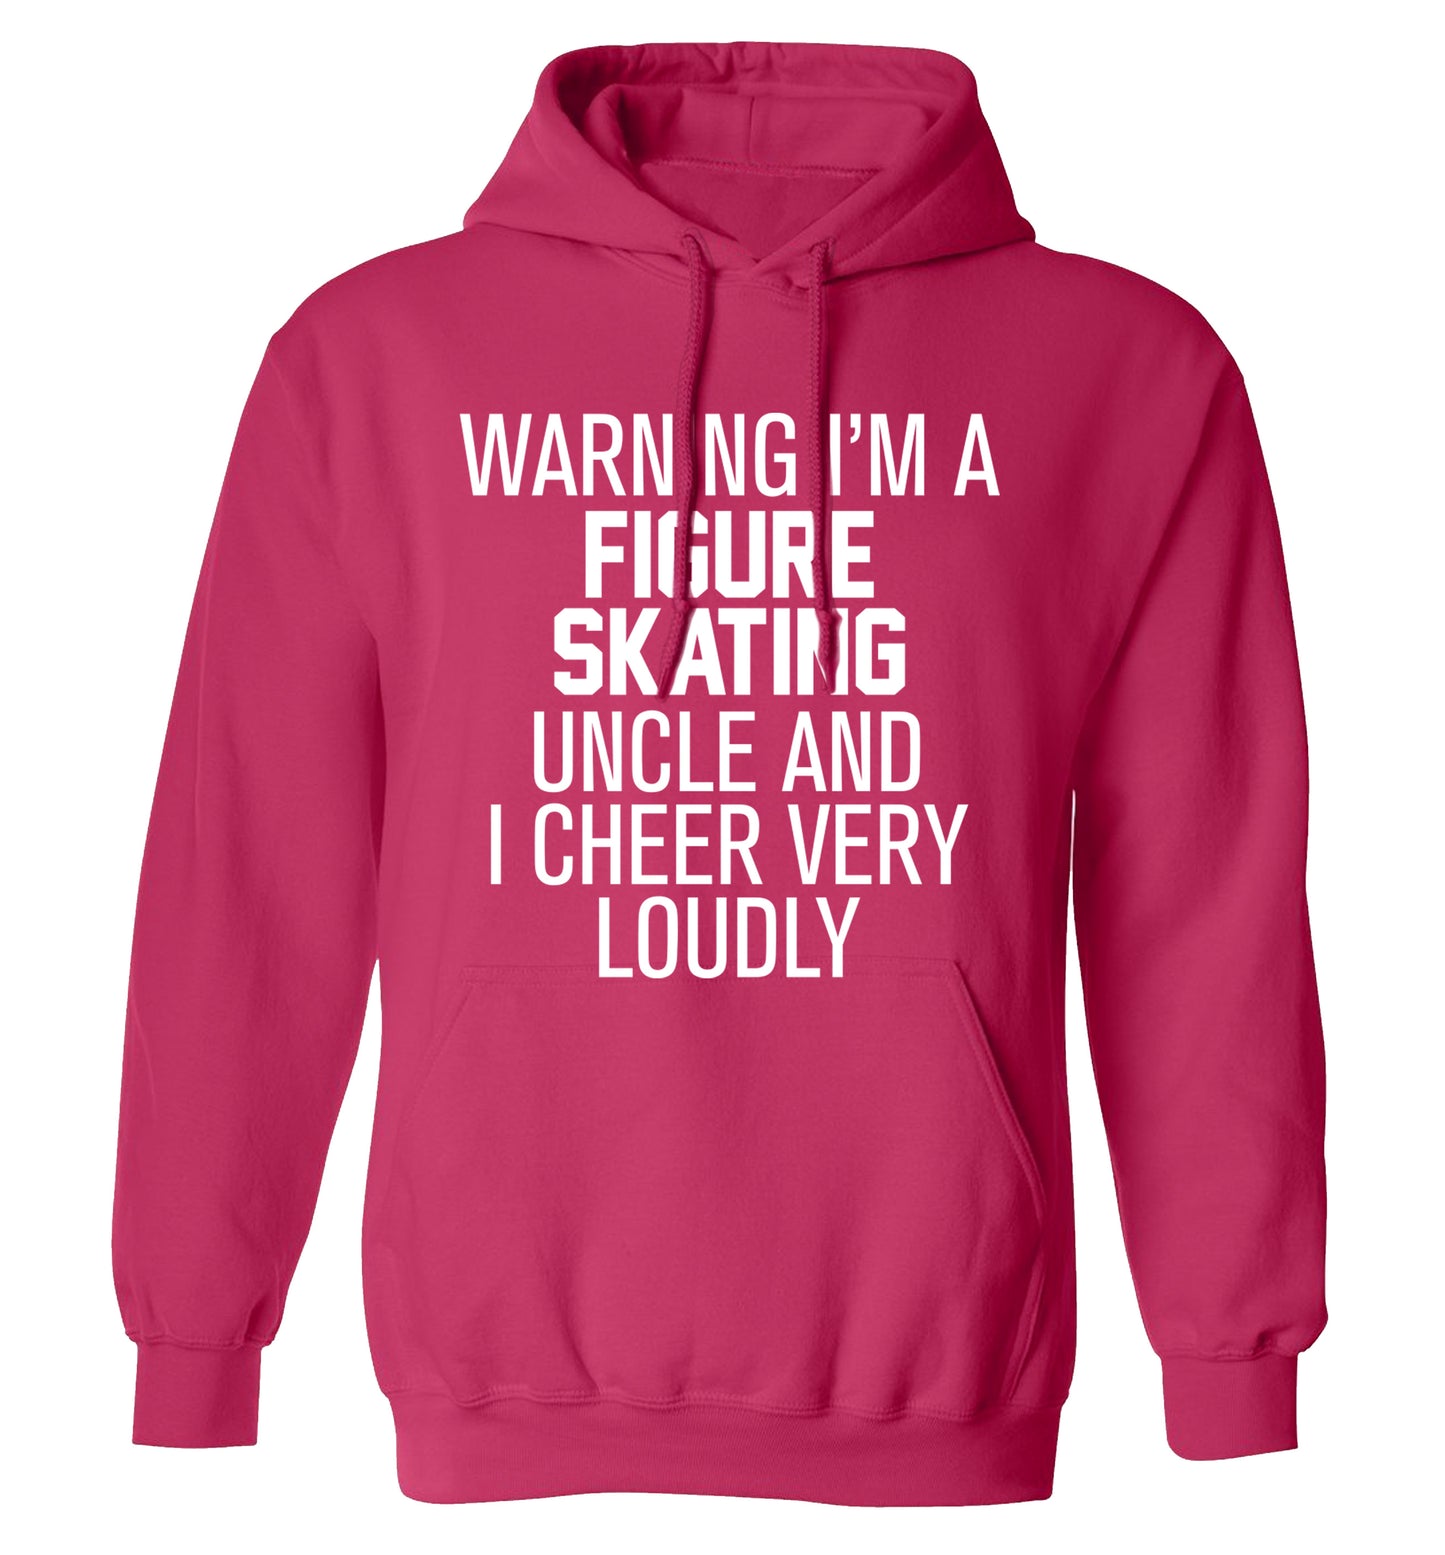 Warning I'm a figure skating uncle and I cheer very loudly adults unisexpink hoodie 2XL